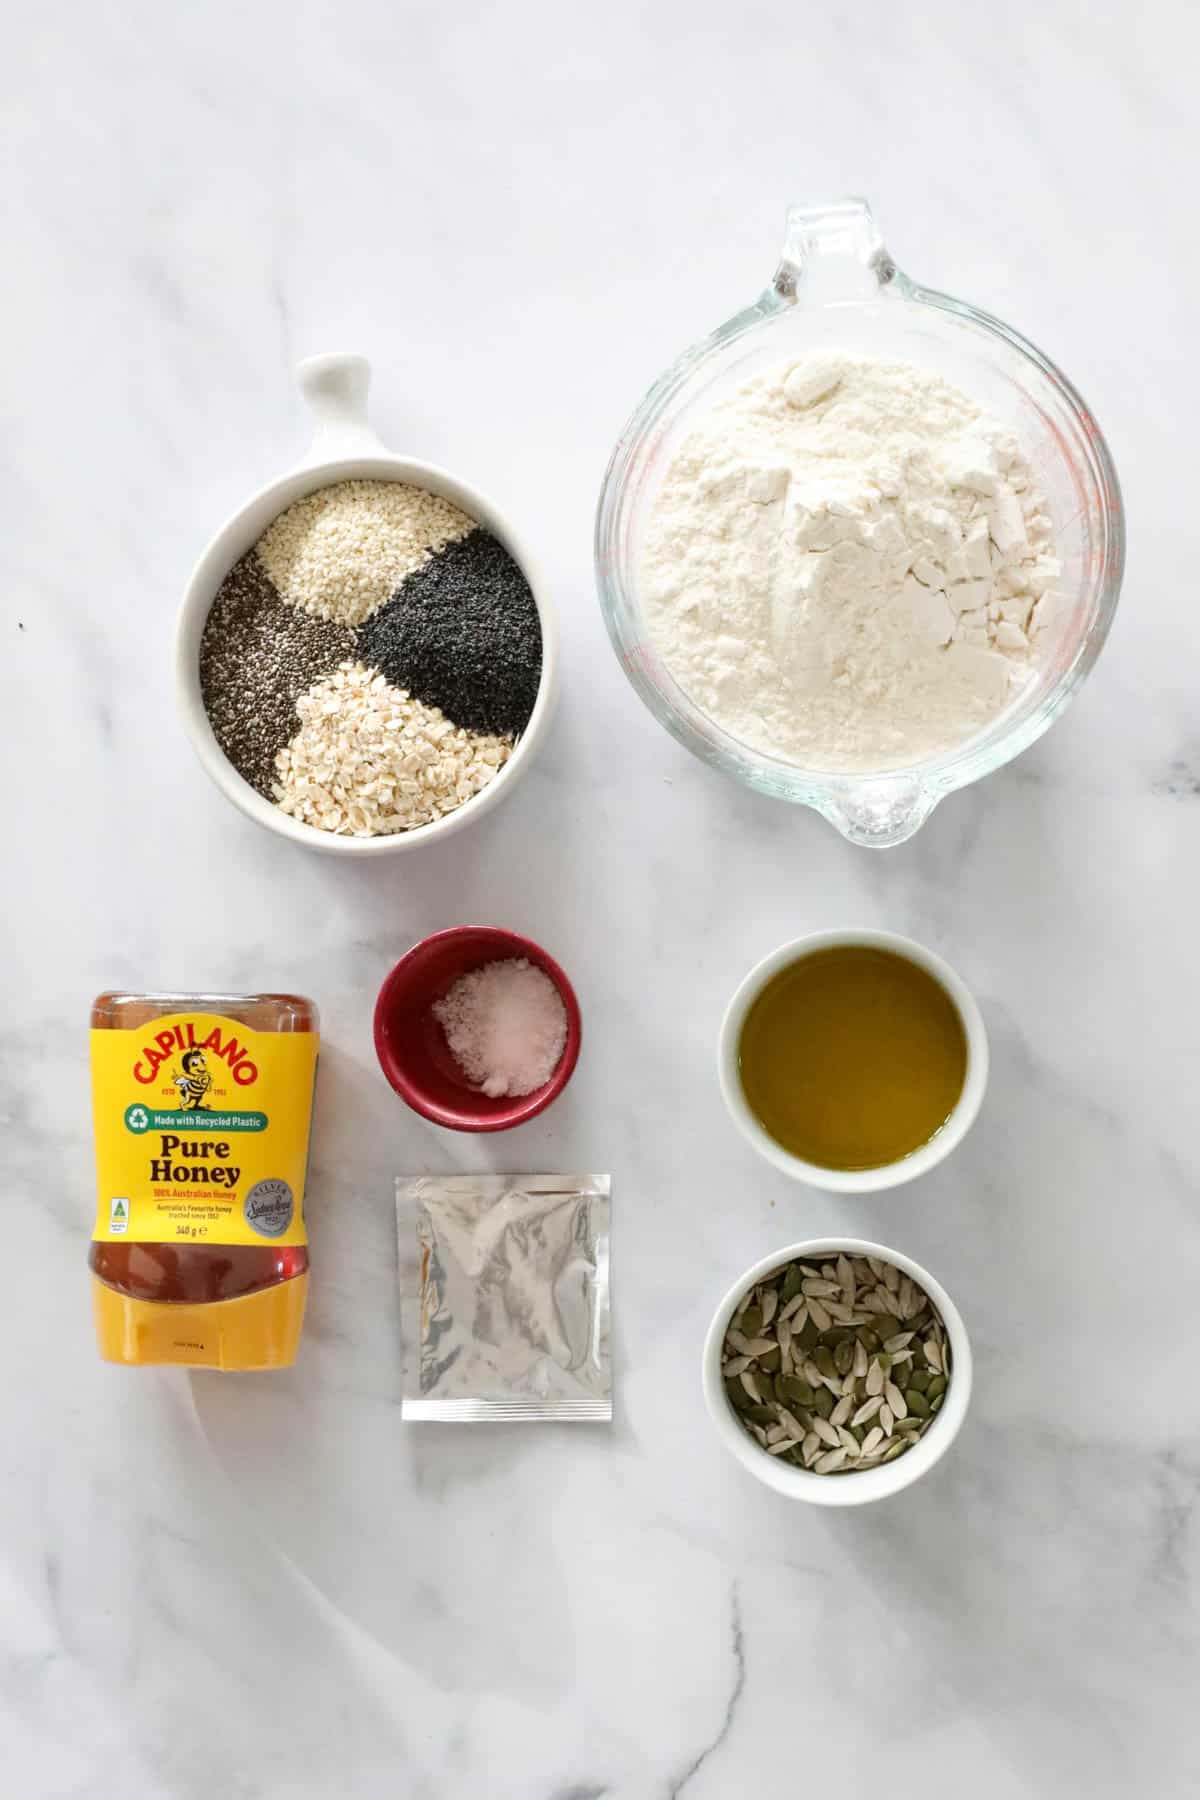 The ingredients for a homemade seed loaf.